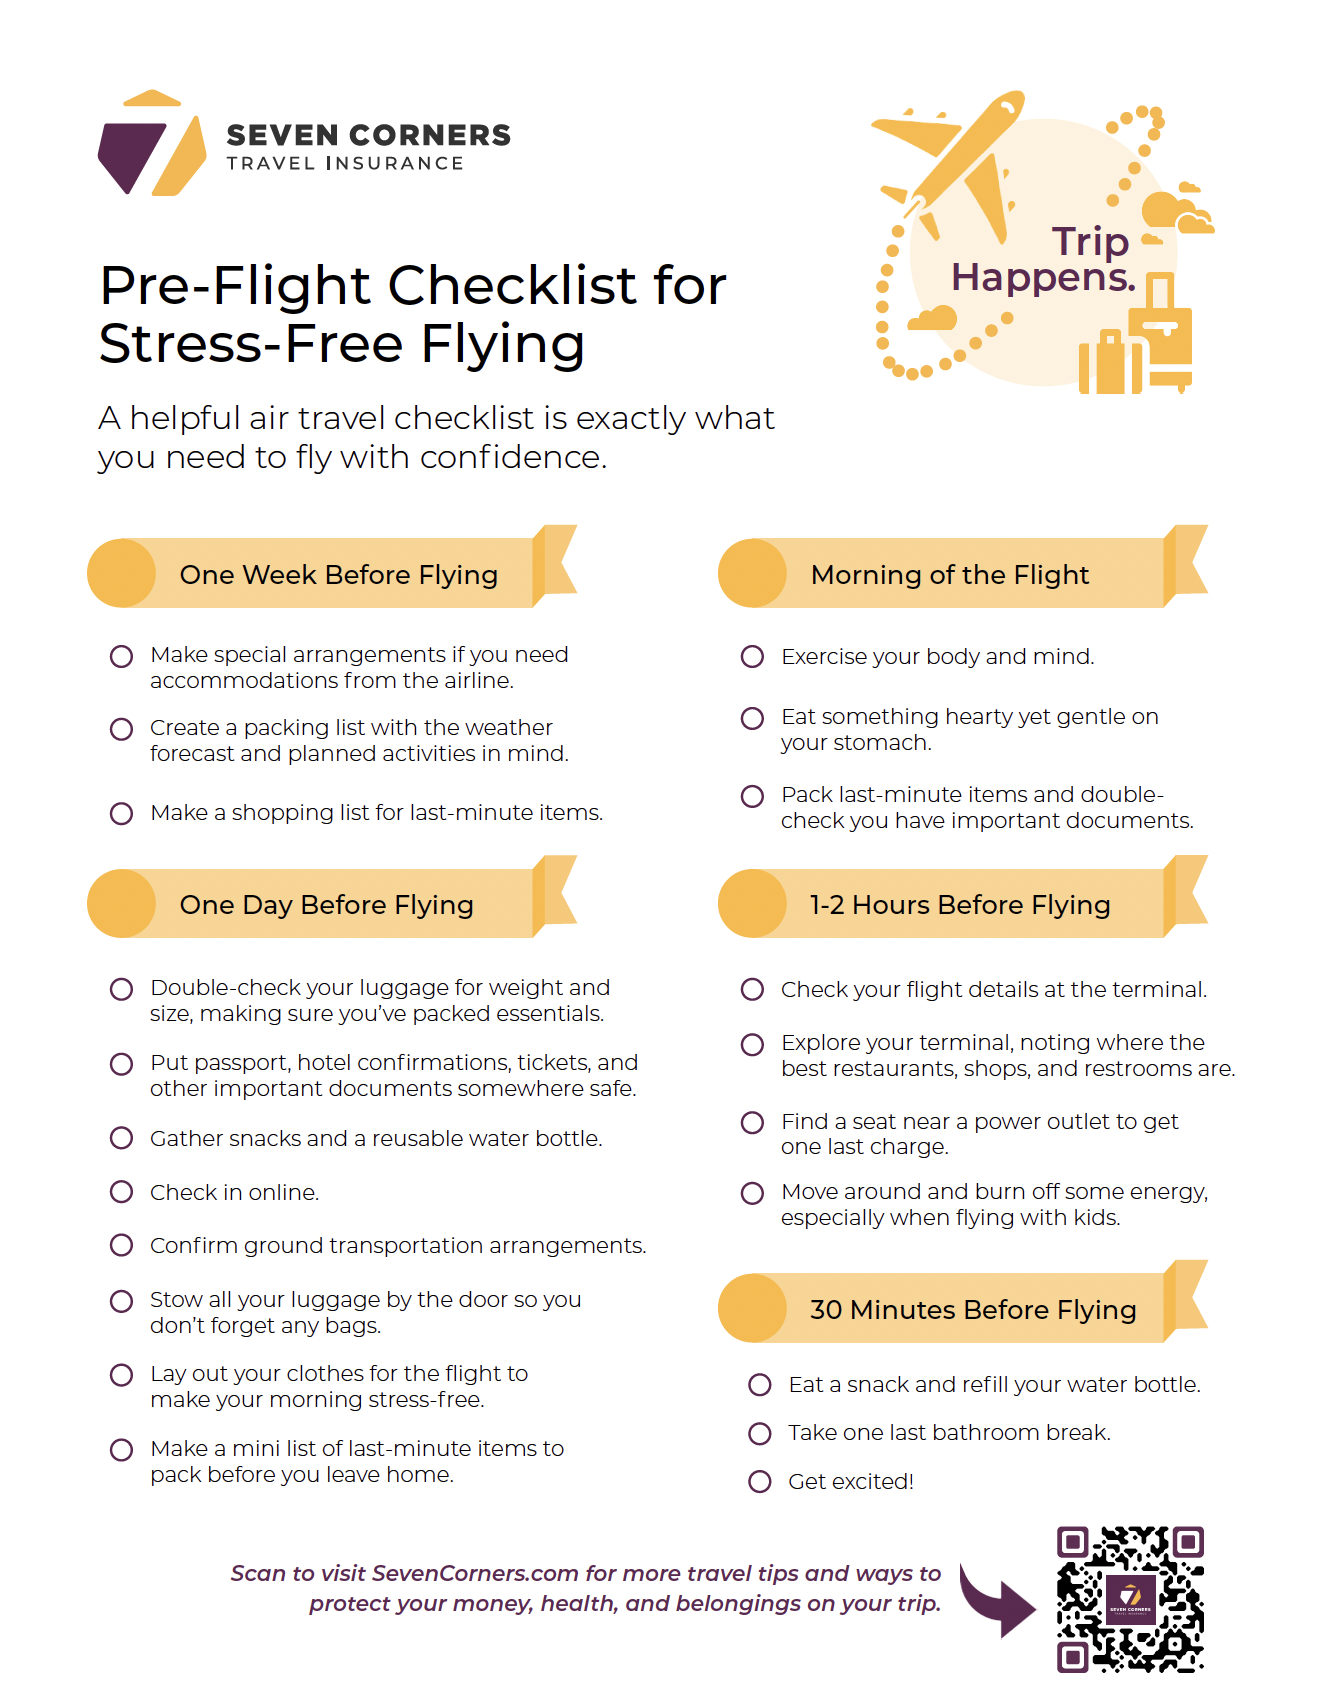 Packing Checklist - Corporate Travel Safety - Safety Tips